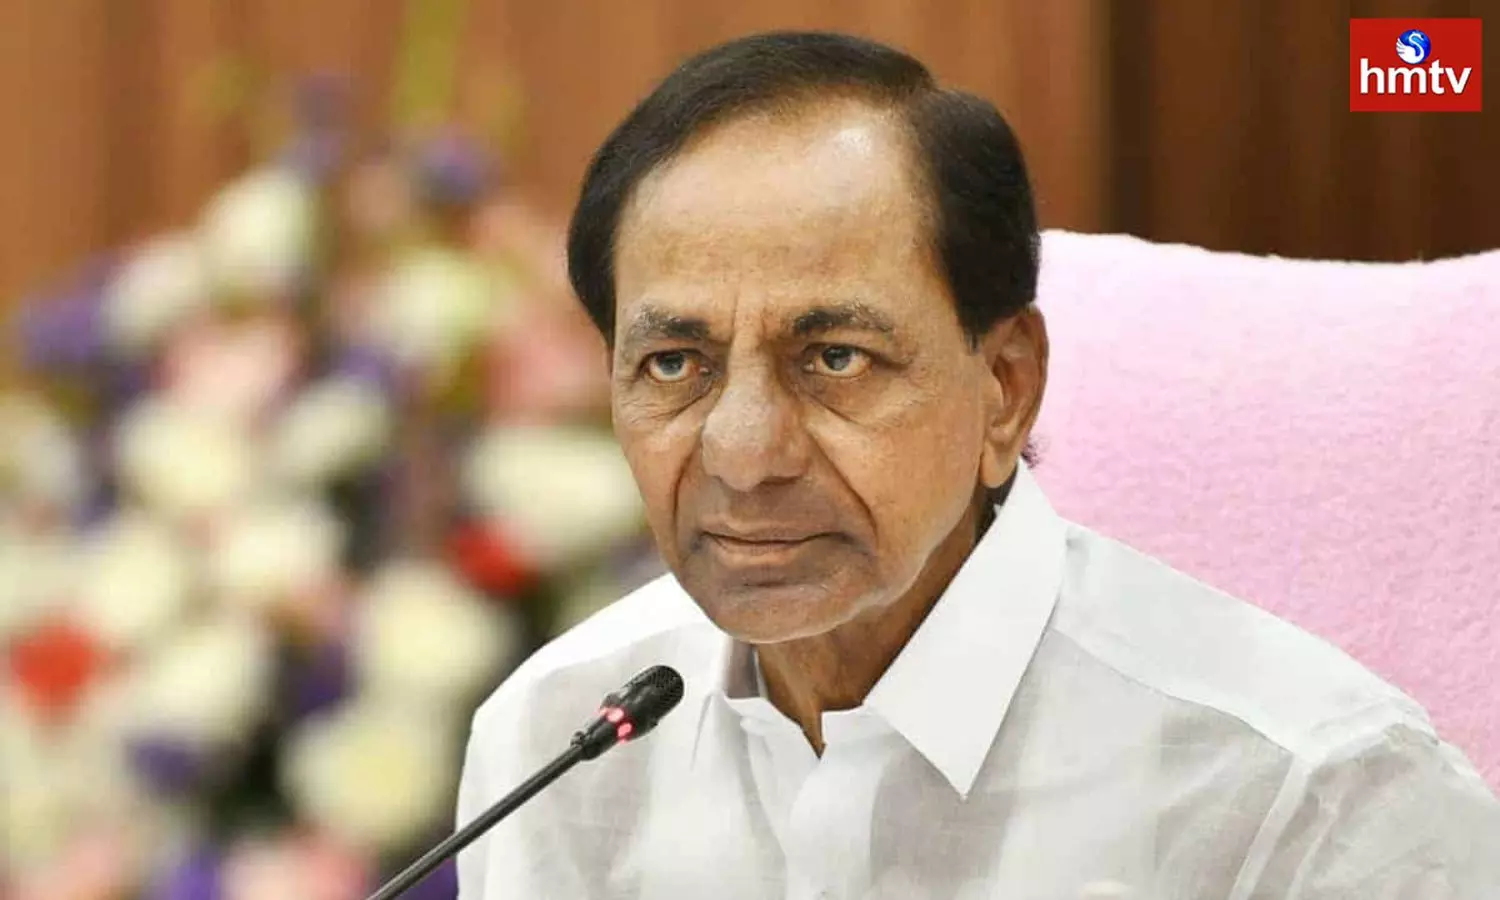 KCR Ordered CS To Send Helicopter To Submerged Moranchapalli For Save People